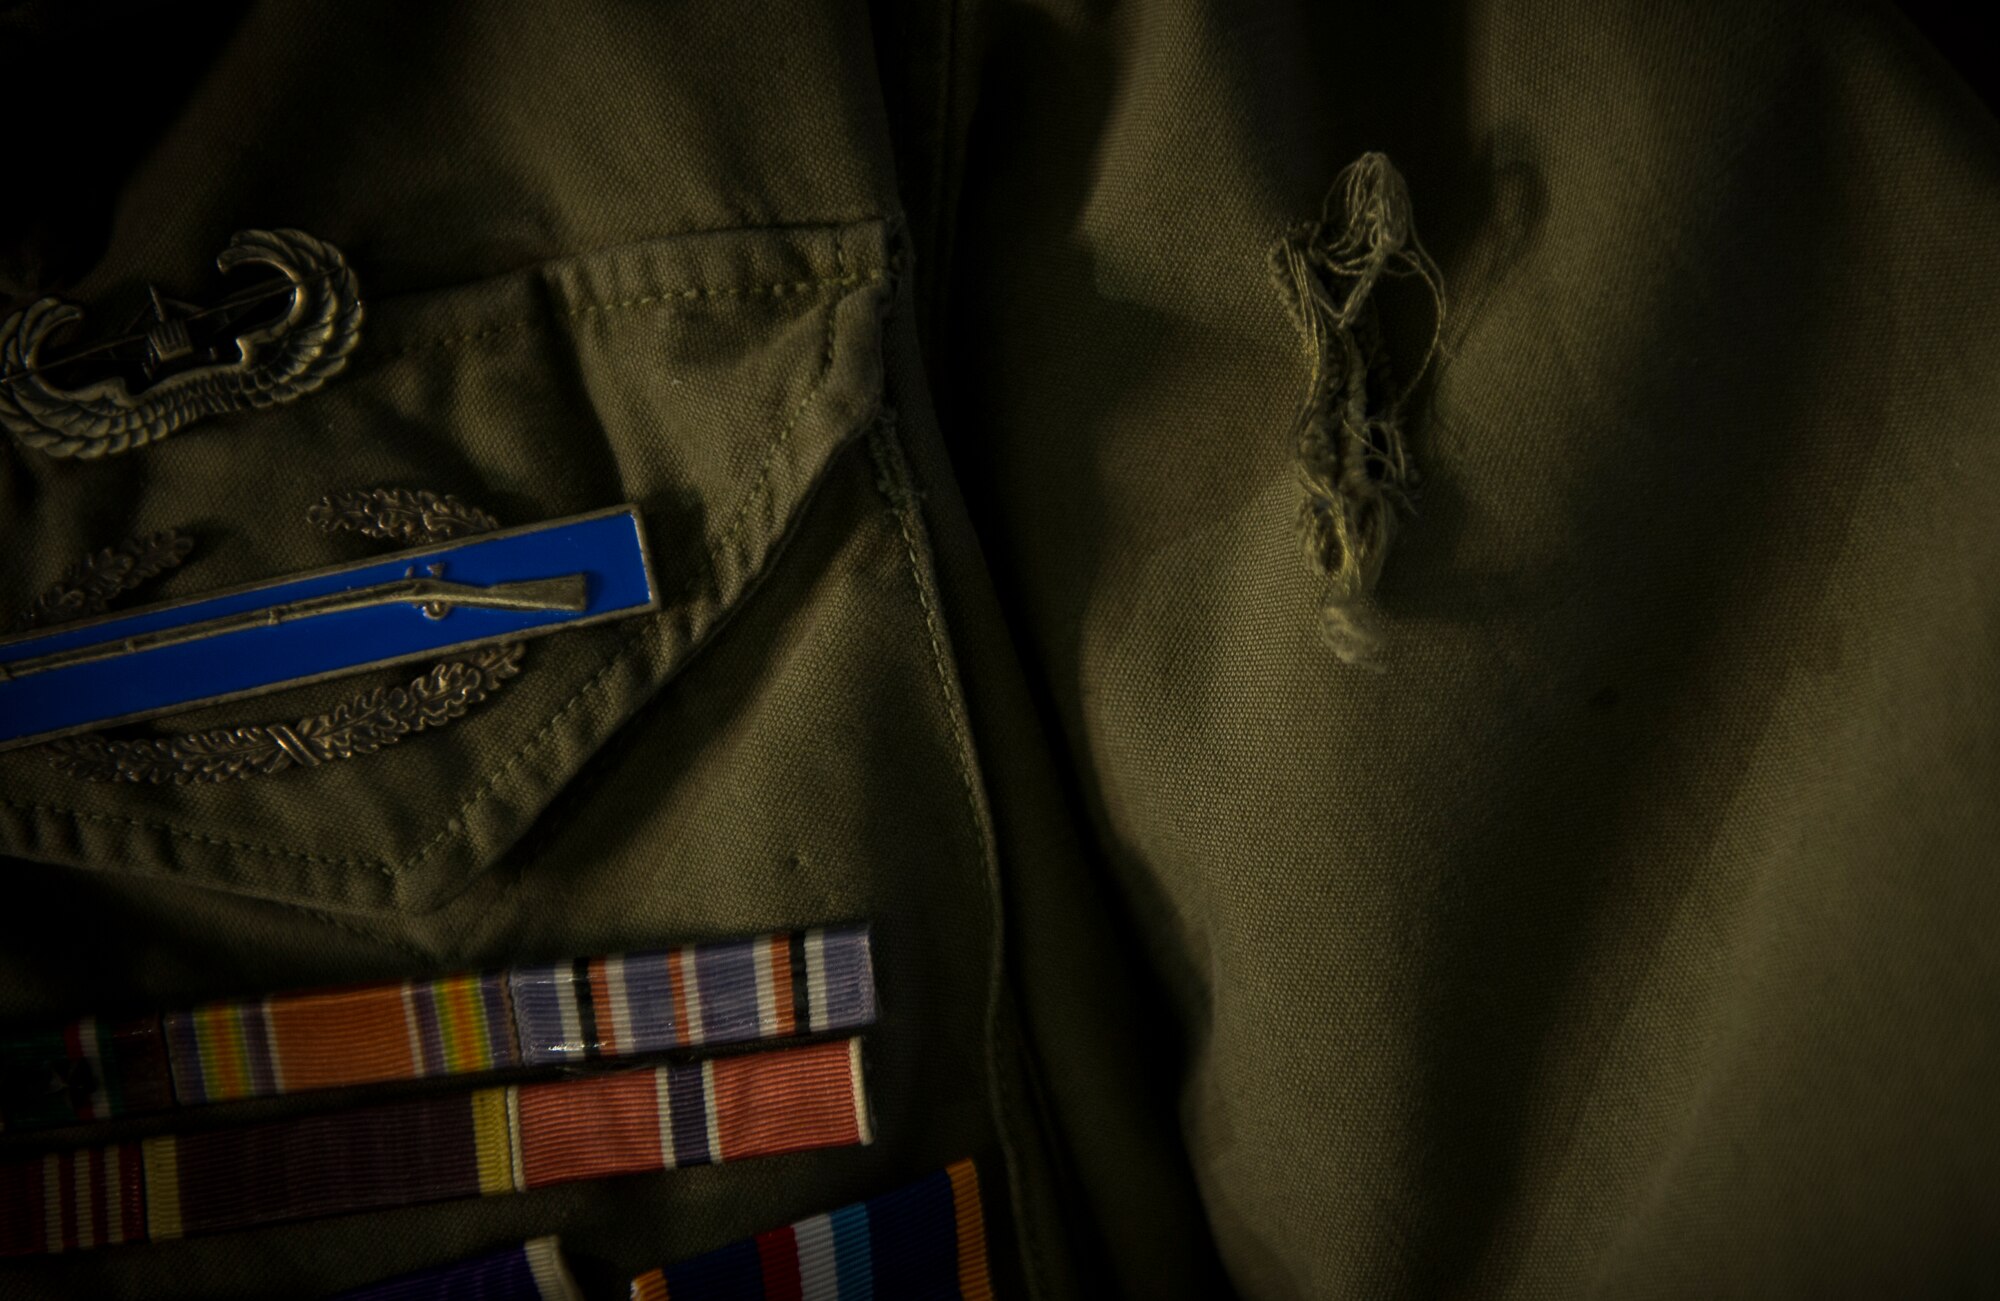 A small hole indicates a shrapnel wound on U.S. Army Private 1st Class (Sep.) Lynn Aas’ jacket during an interview at the Dakota Territory Air Museum in Minot, N.D., Feb. 18, 2016. Aas served as a combat infantry rifleman during the Battle of the Bulge. (U.S. Air Force photo/Senior Airman Apryl Hall)